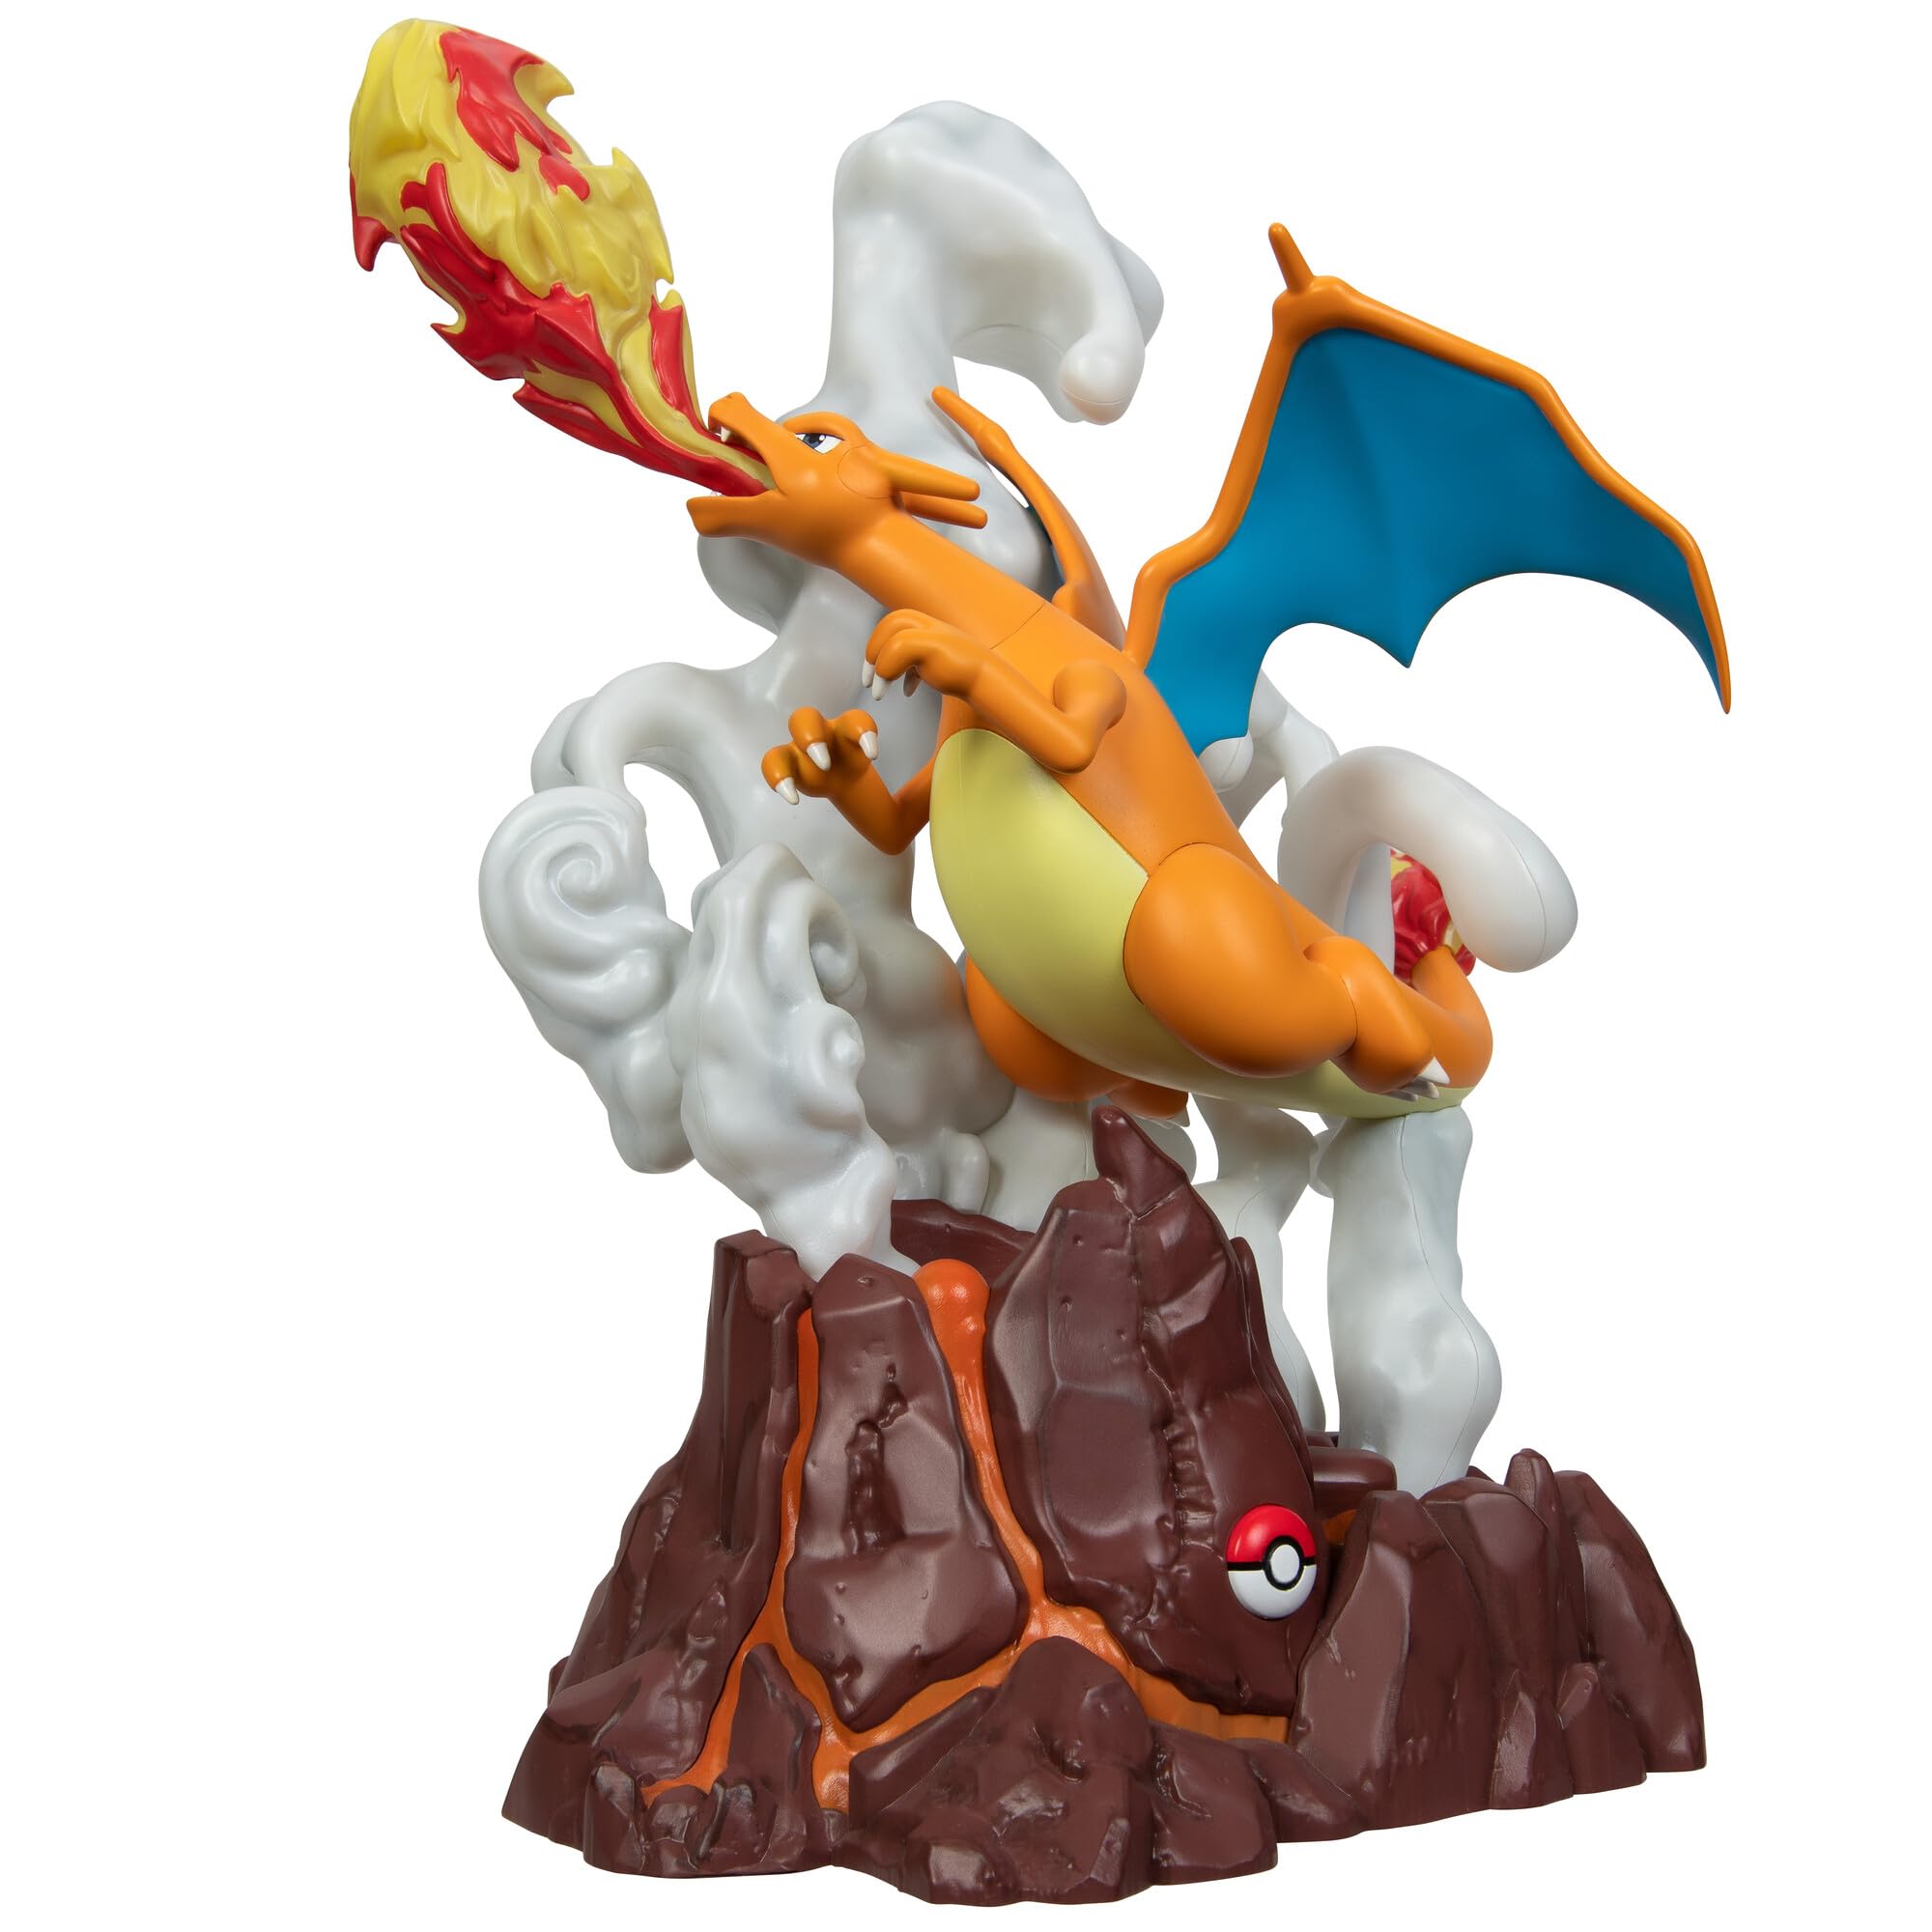 13" Jazwares Pokemon Deluxe Collector’s Light Up Statue (Charizard) $27.40 + Free Shipping w/ Prime or on $35+